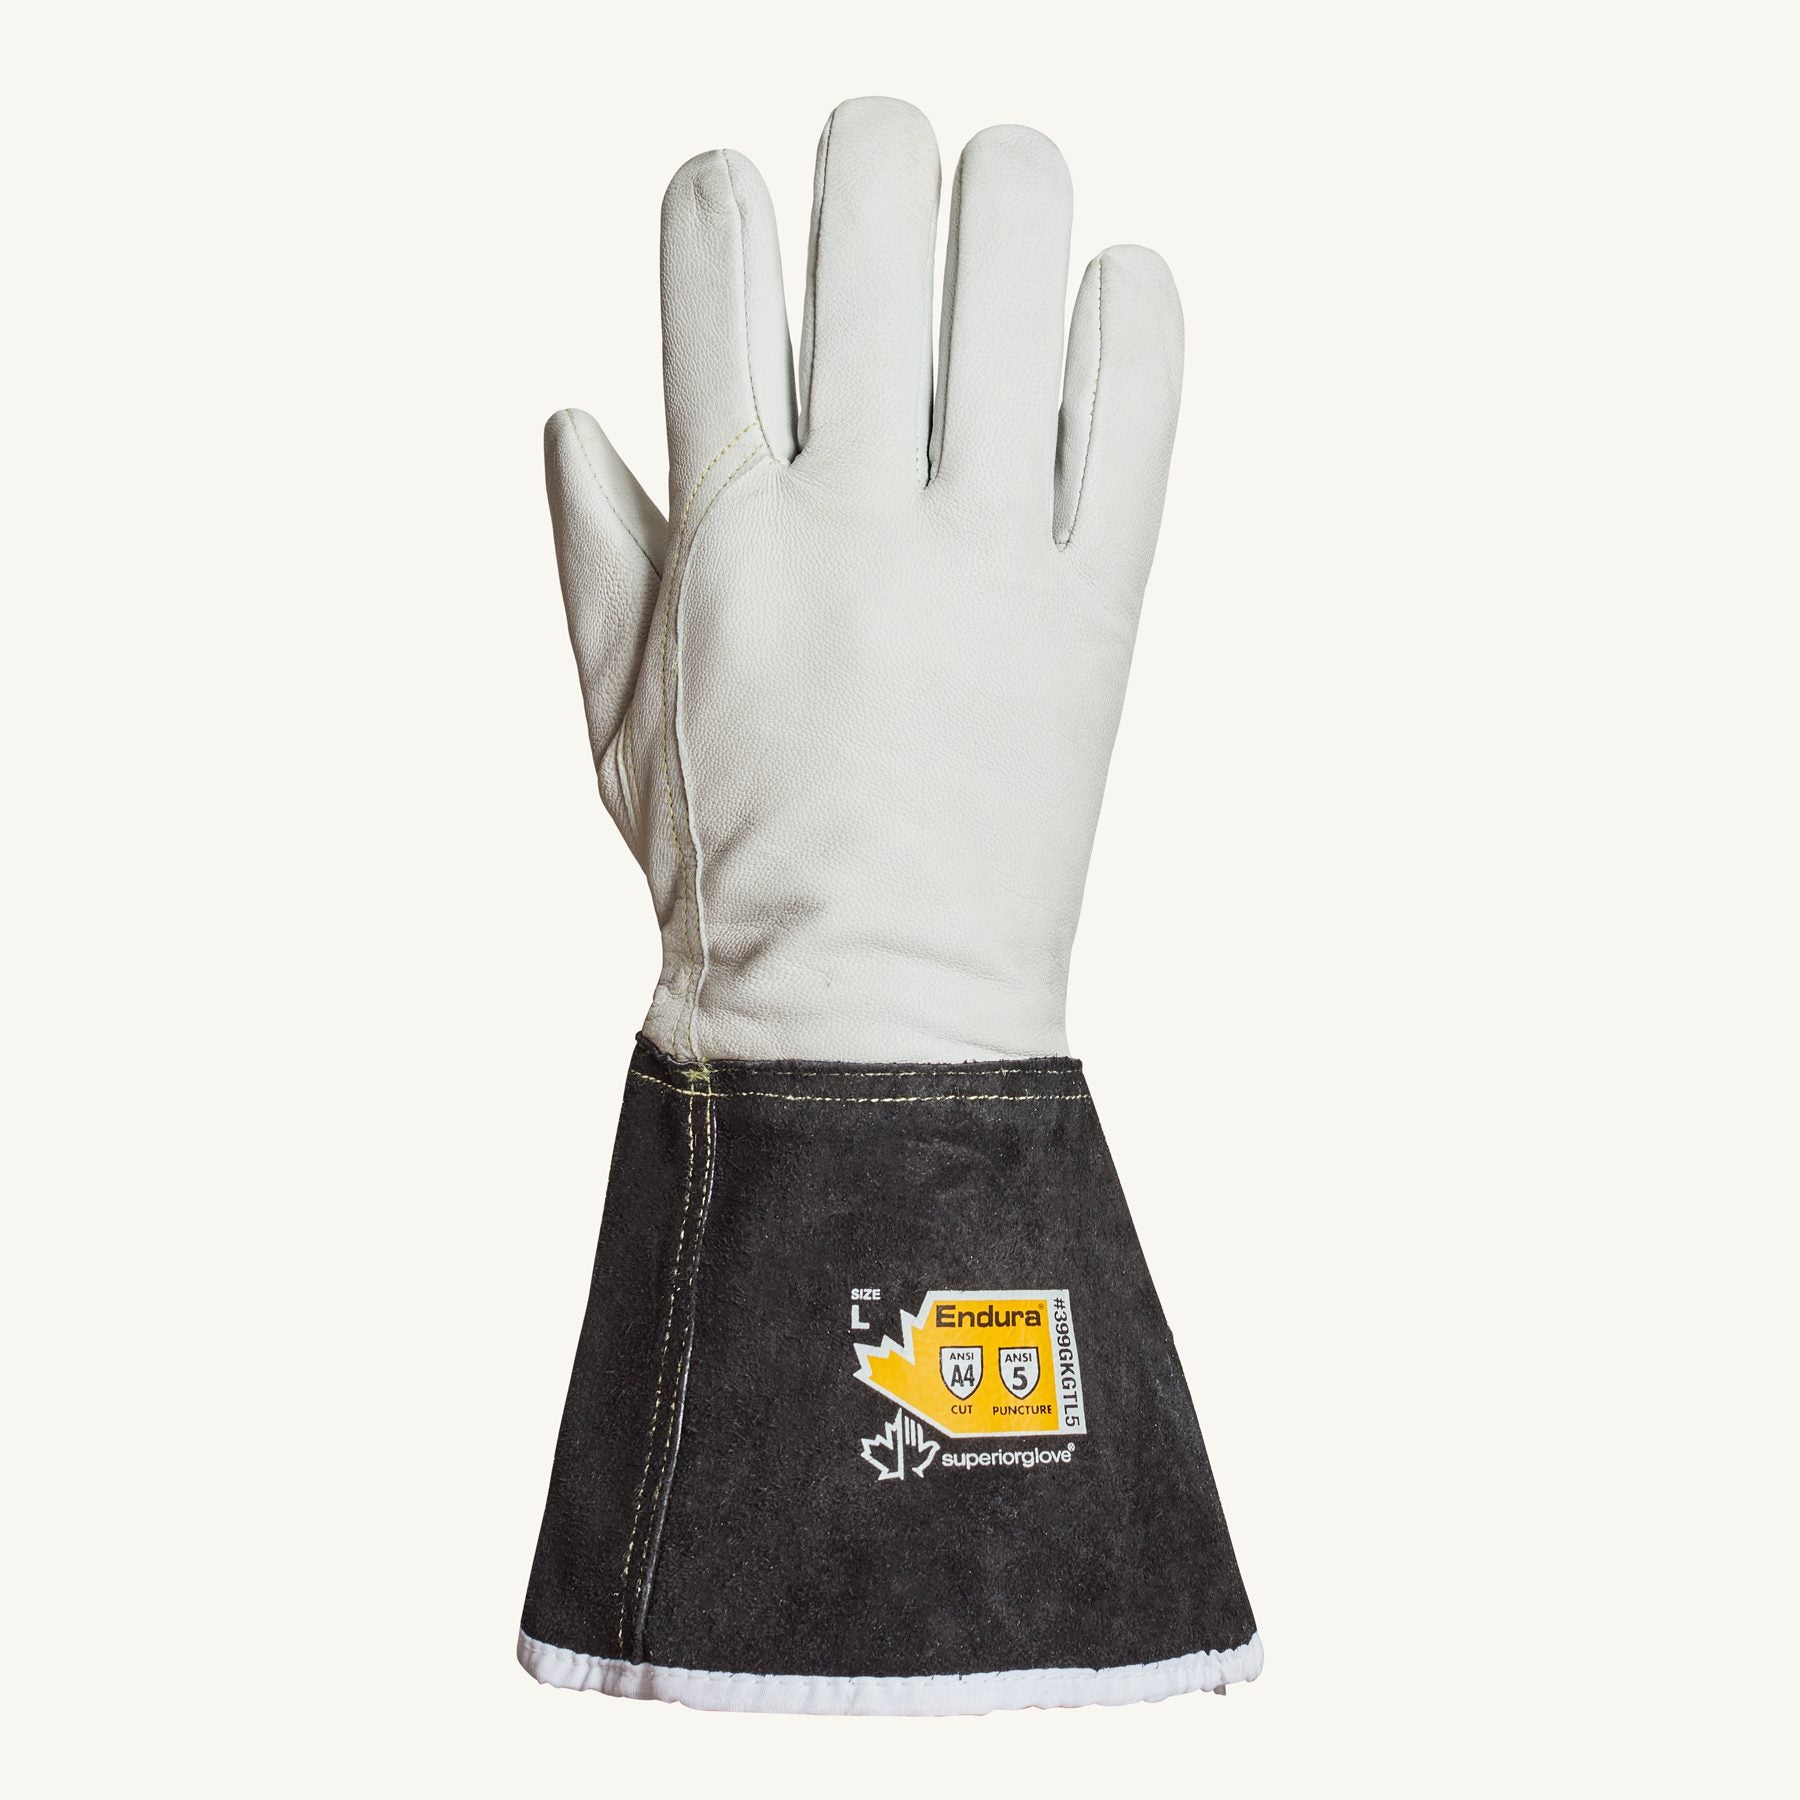 Superior Glove Goat-Skin Gloves with Blended Kevlar & Thinsulate Lining - 5 Inch Split Cuff (Small)